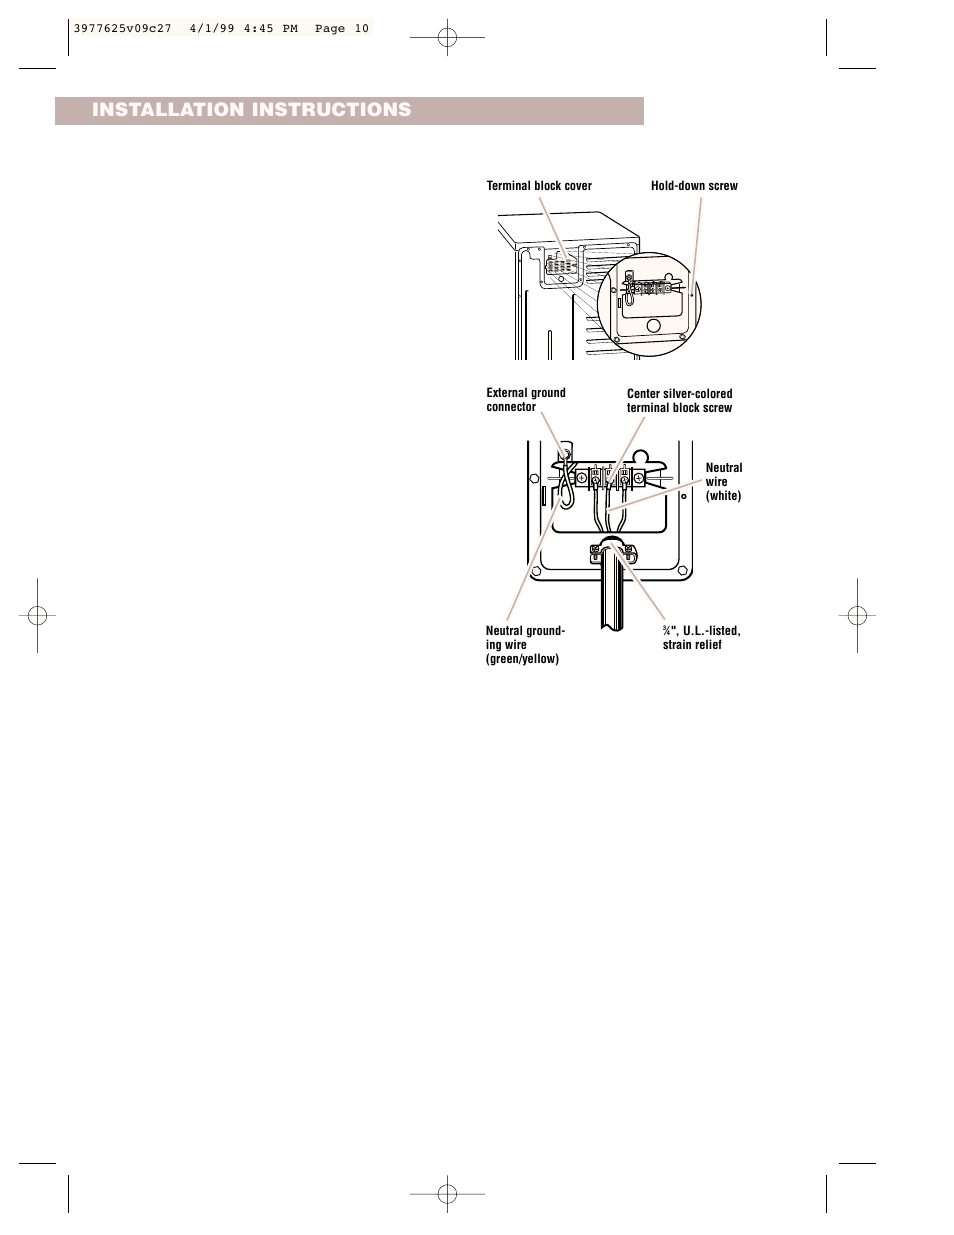 Installation instructions | Whirlpool 240-volt User Manual | Page 10 / 33